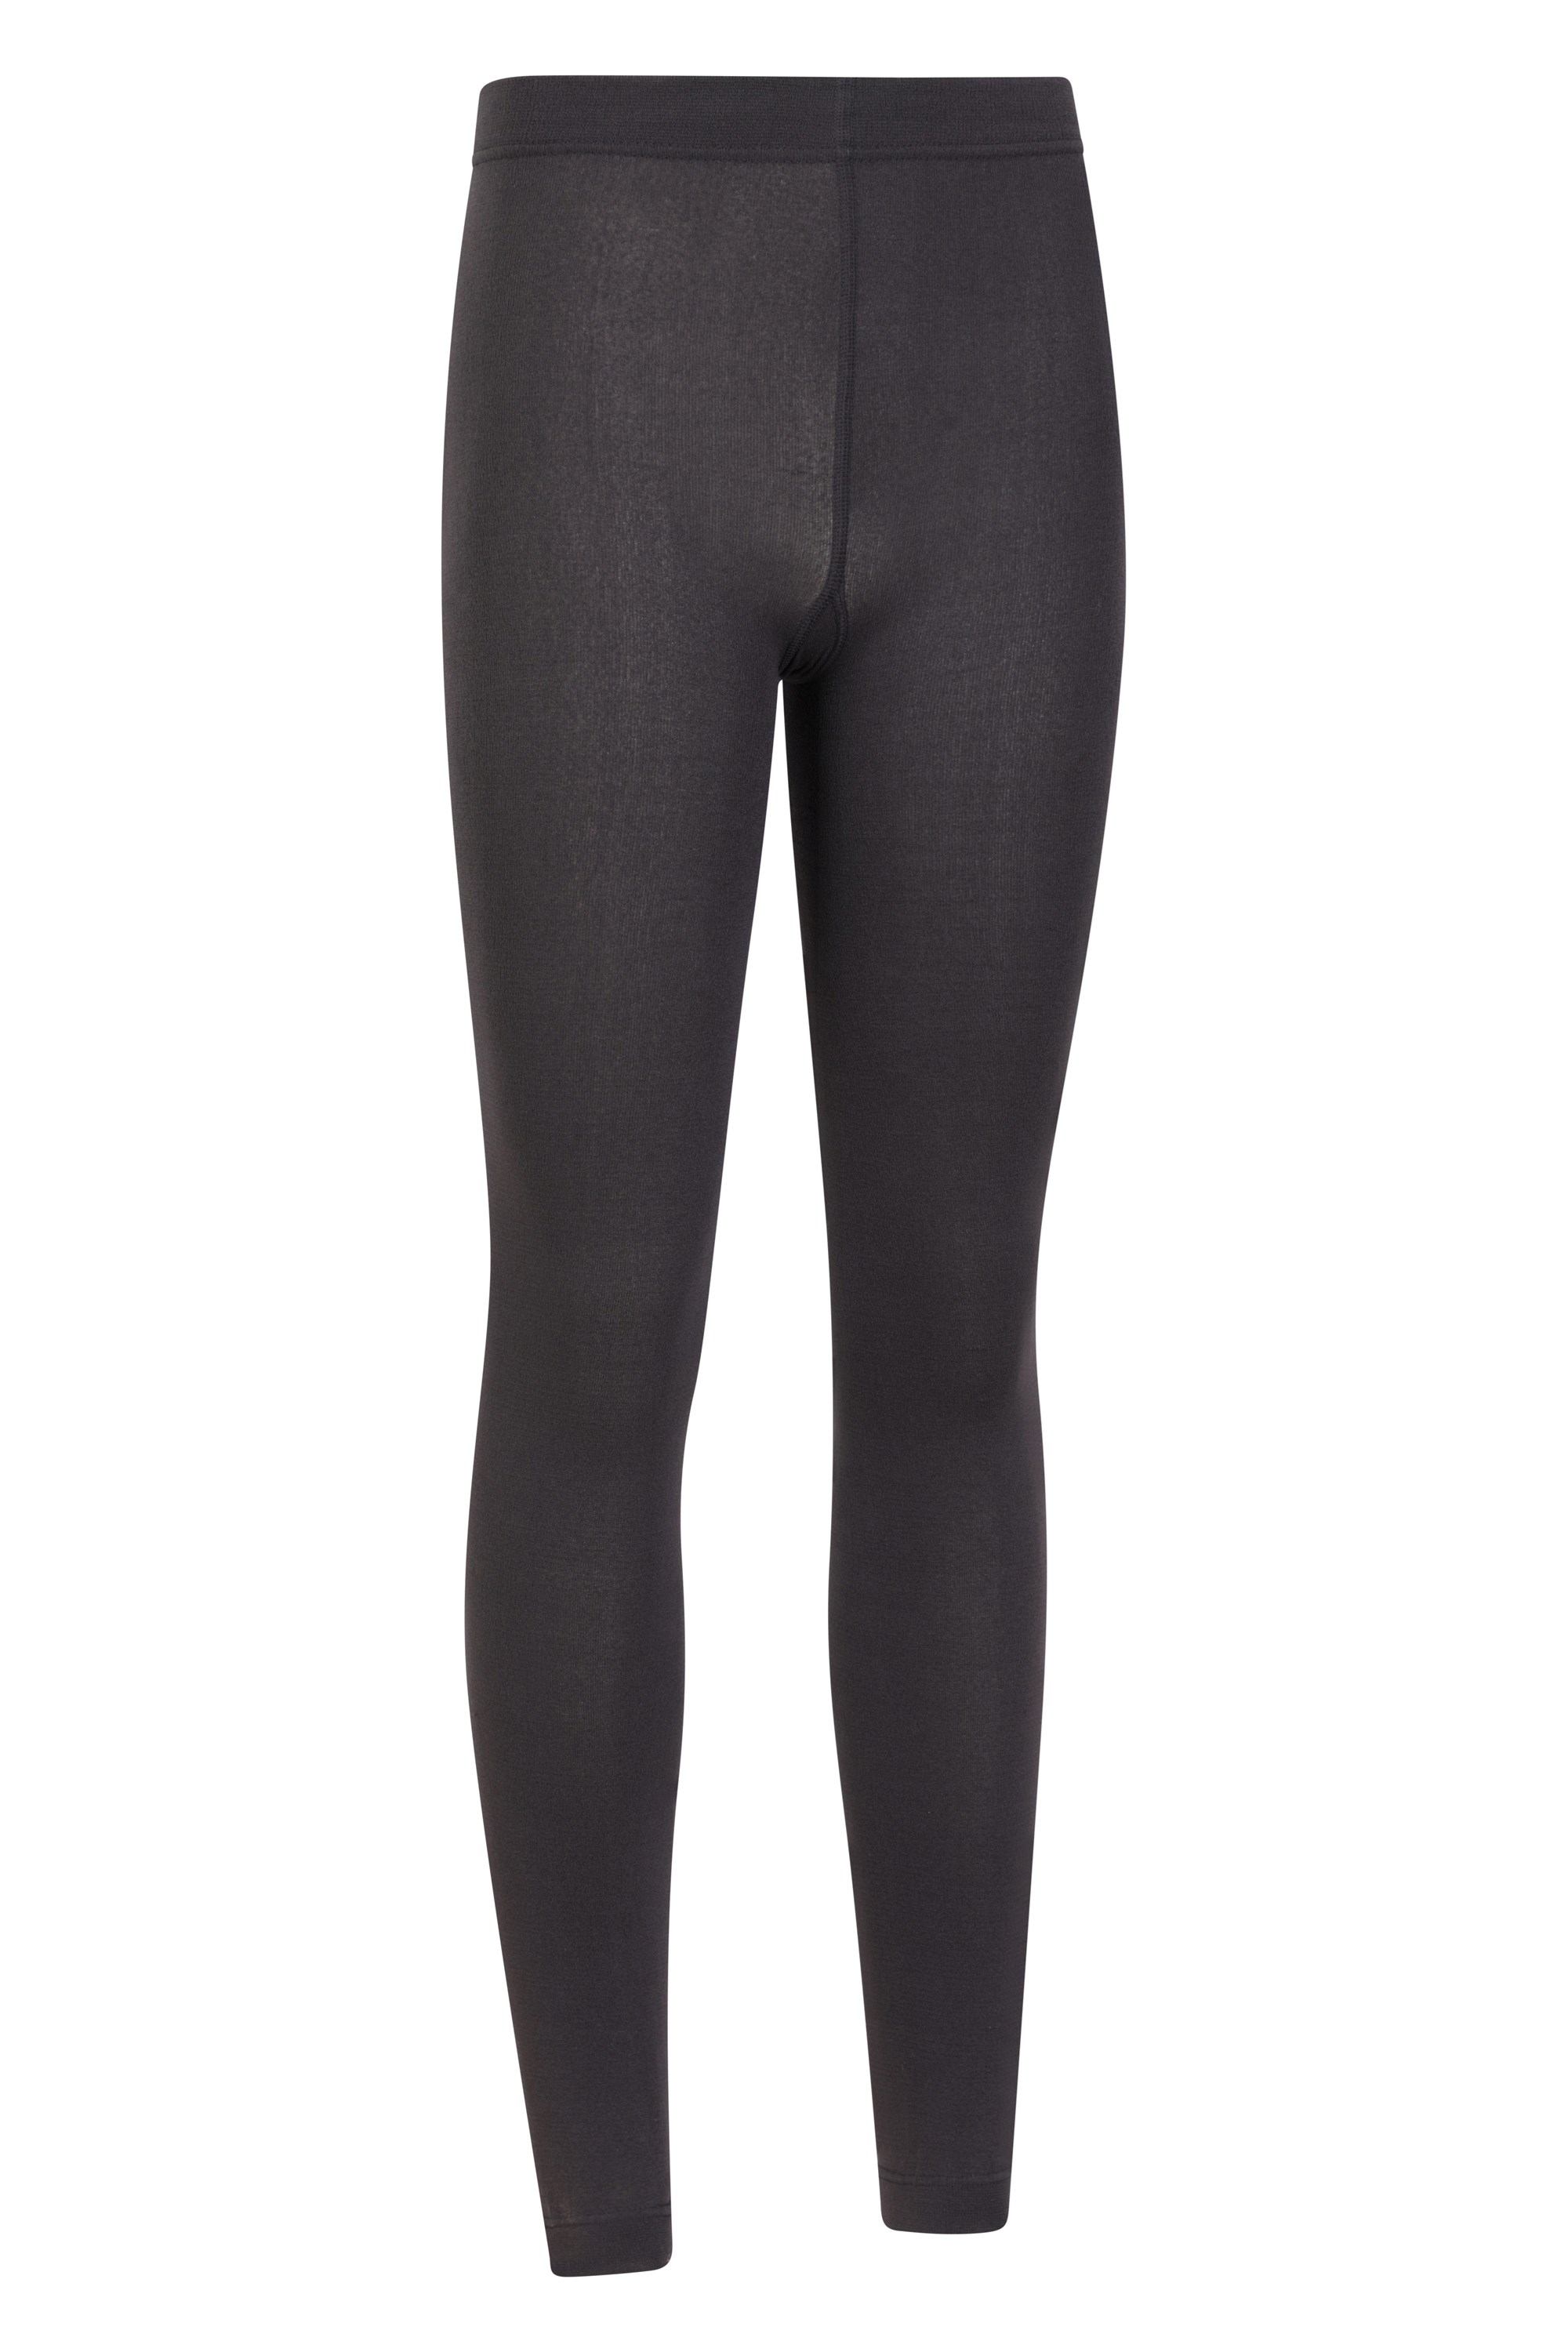 Buy Mountain Warehouse Black Womens Pro Running Reflective Leggings from  the Next UK online shop